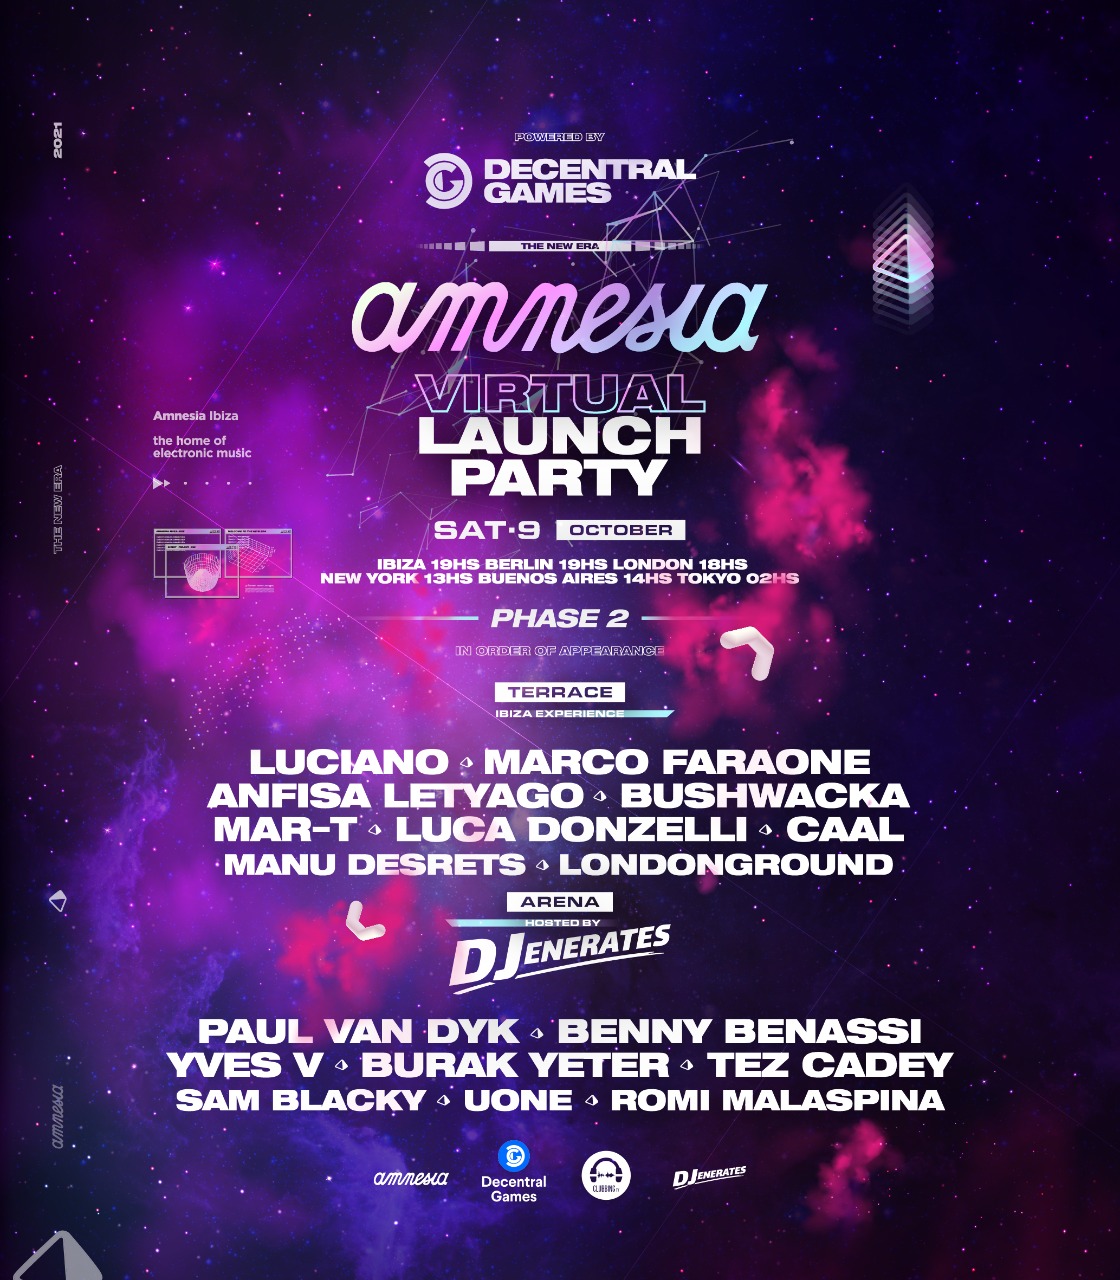 Decentral Games and Amnesia Ibiza’s party in the Metaverse with Djenerates!